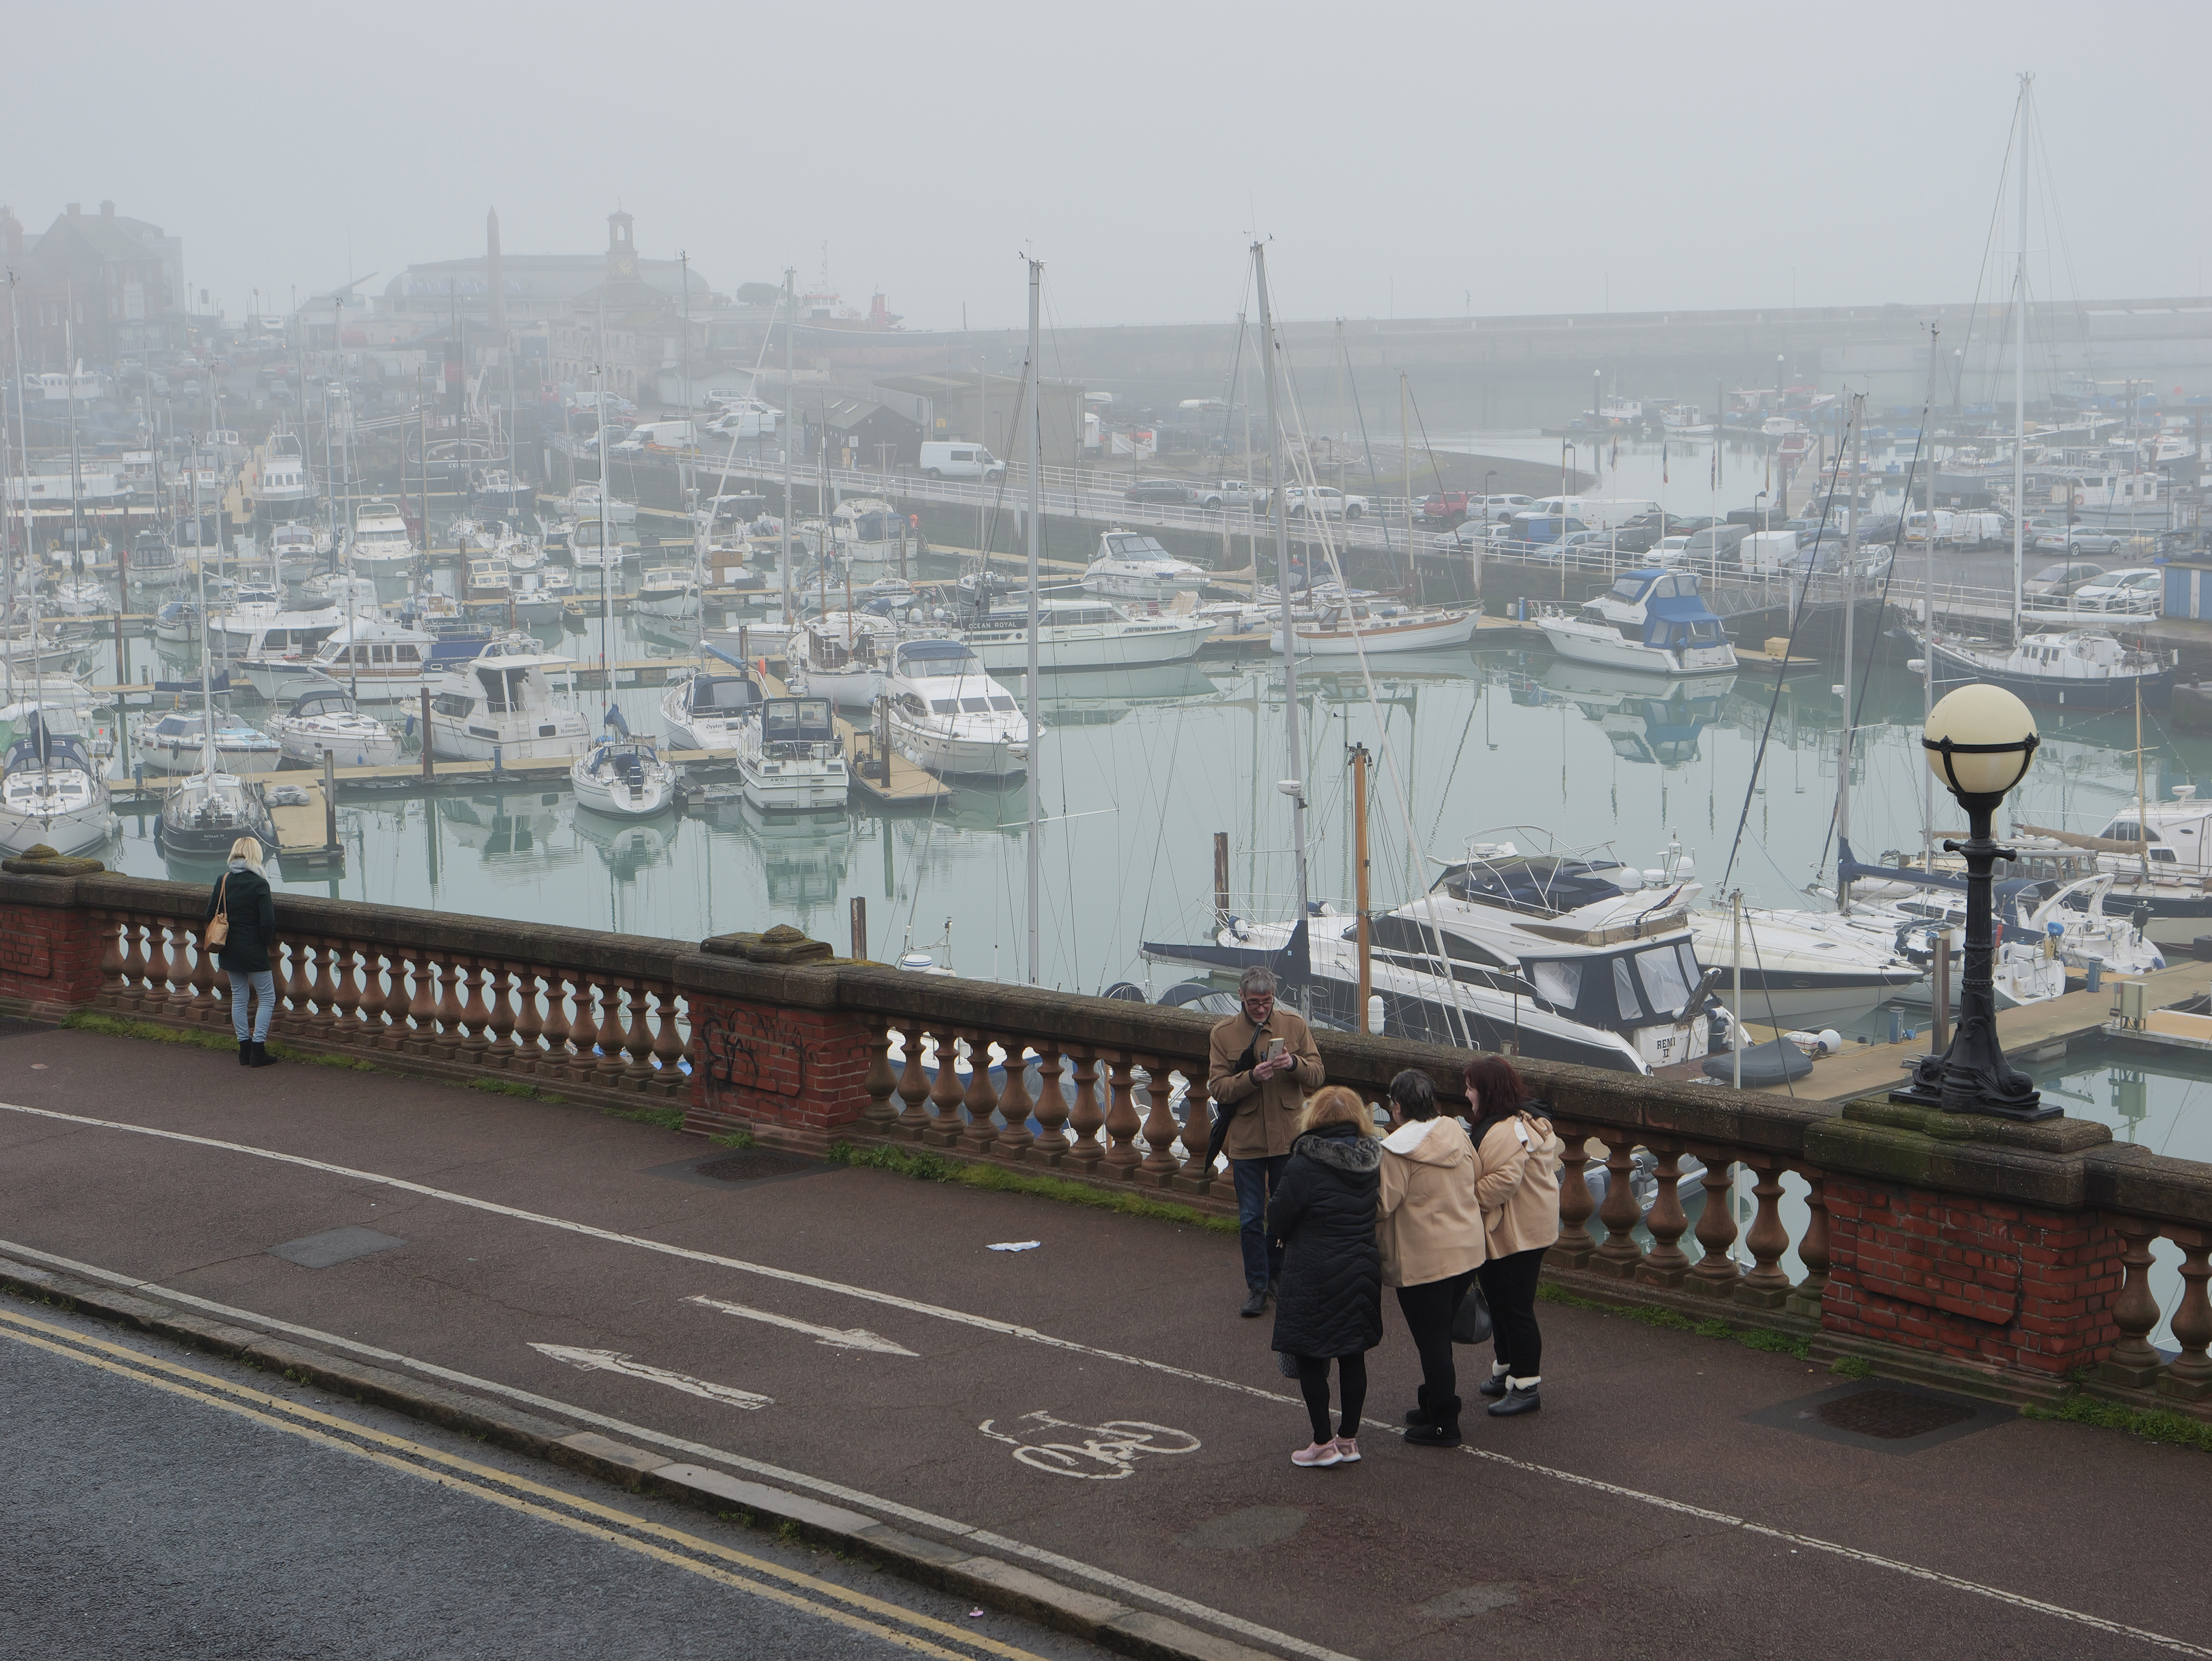 A quay of boats in Ramsgate